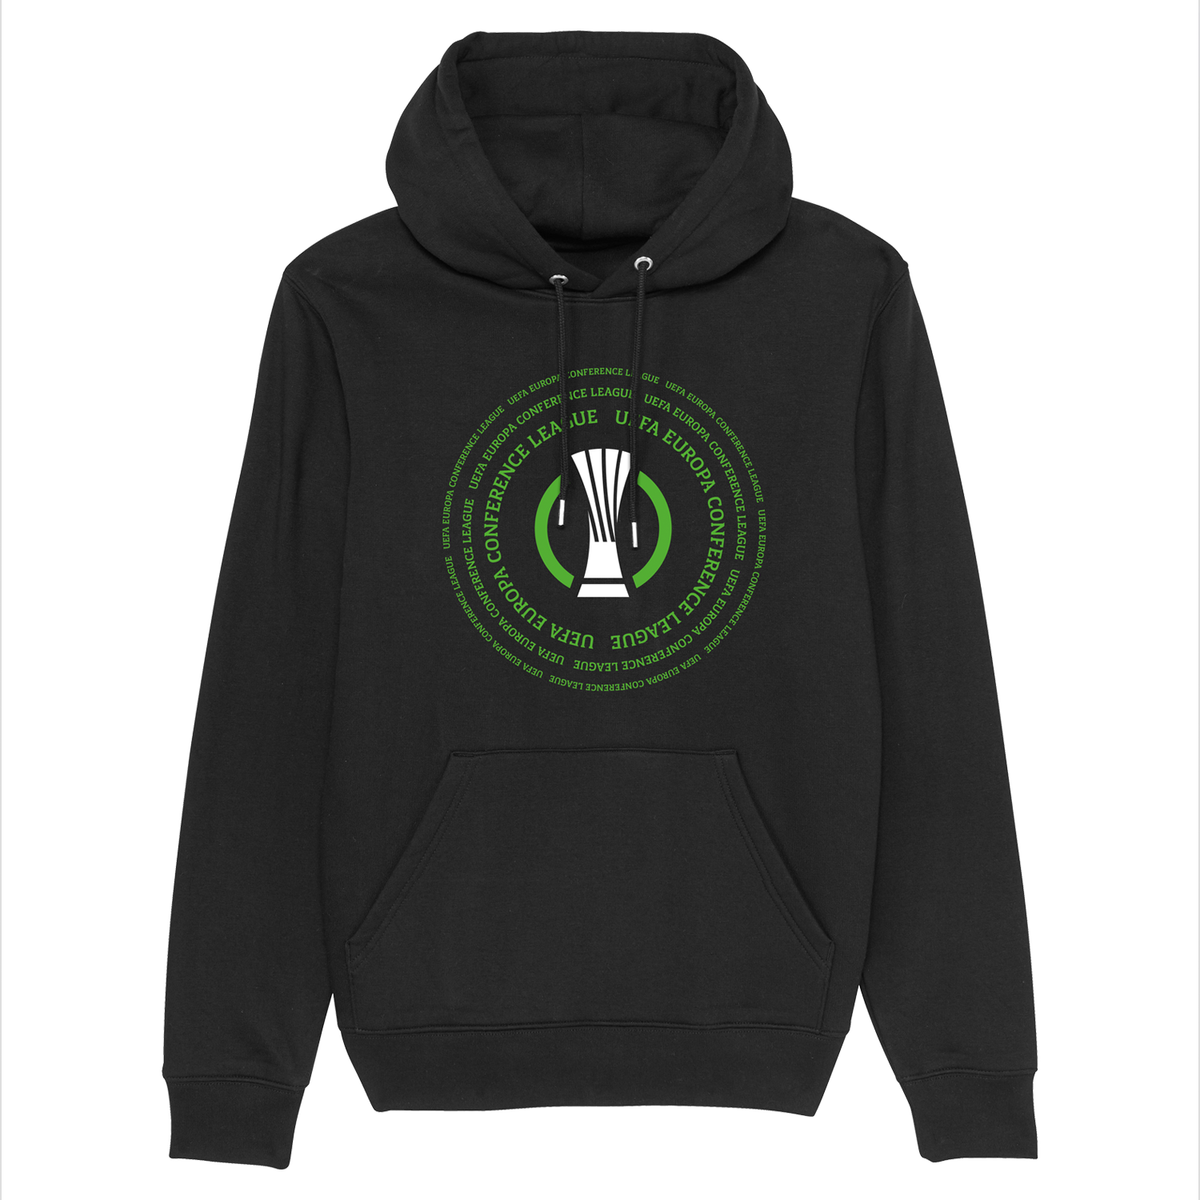 UEFA Europa Conference League - Roundel Black Hoodie UEFA Club Competitions Online Store